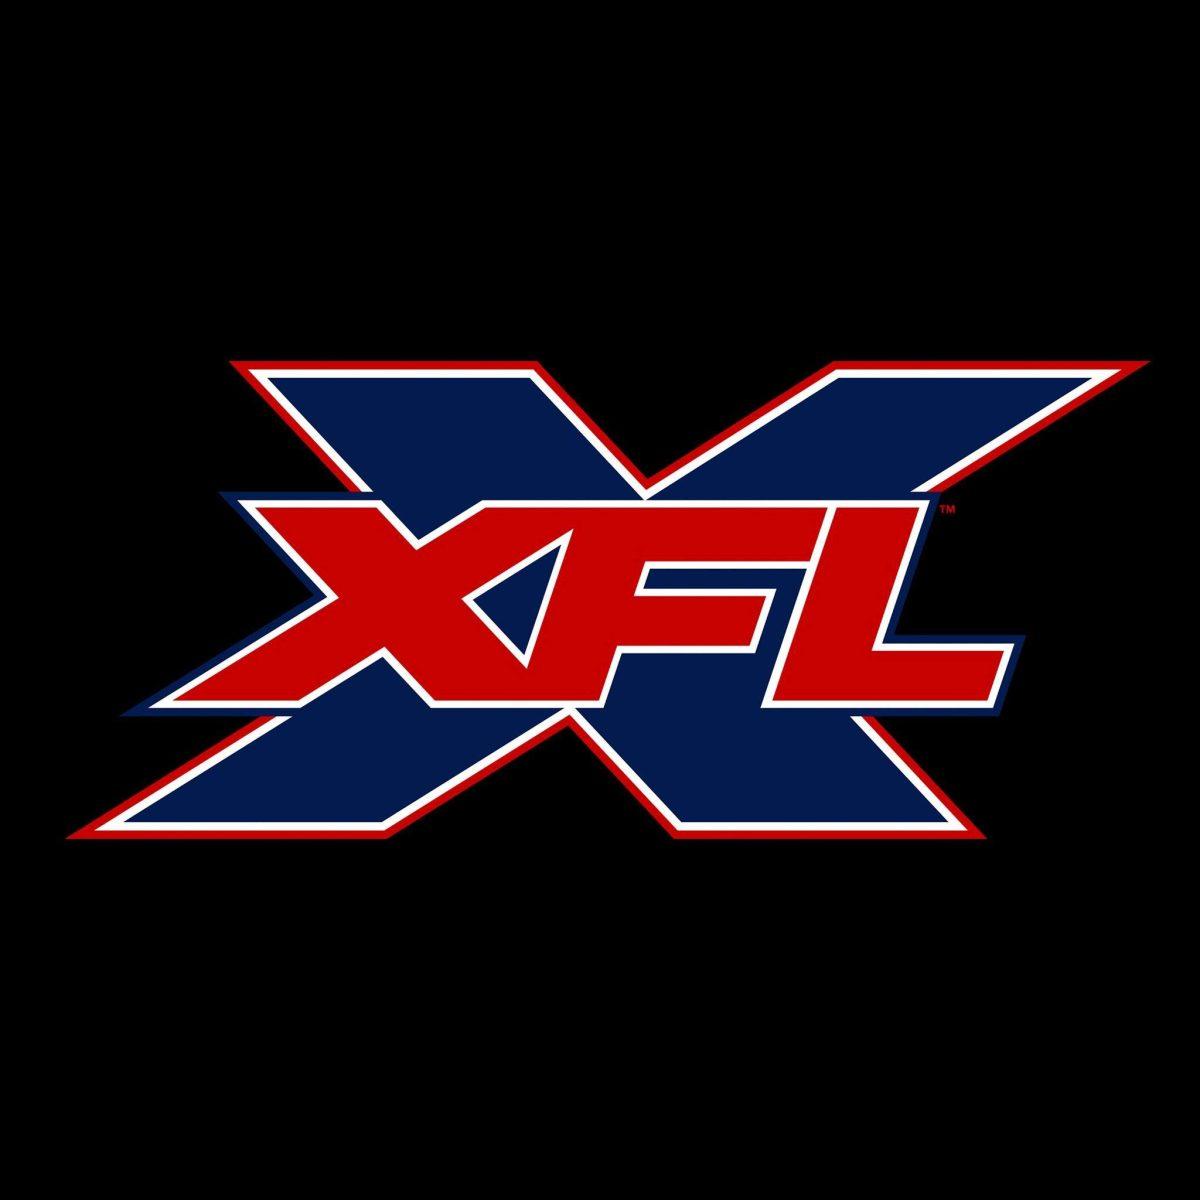 Jackson King talks about why he believes the XFL is on its way to being a successful spring football league.